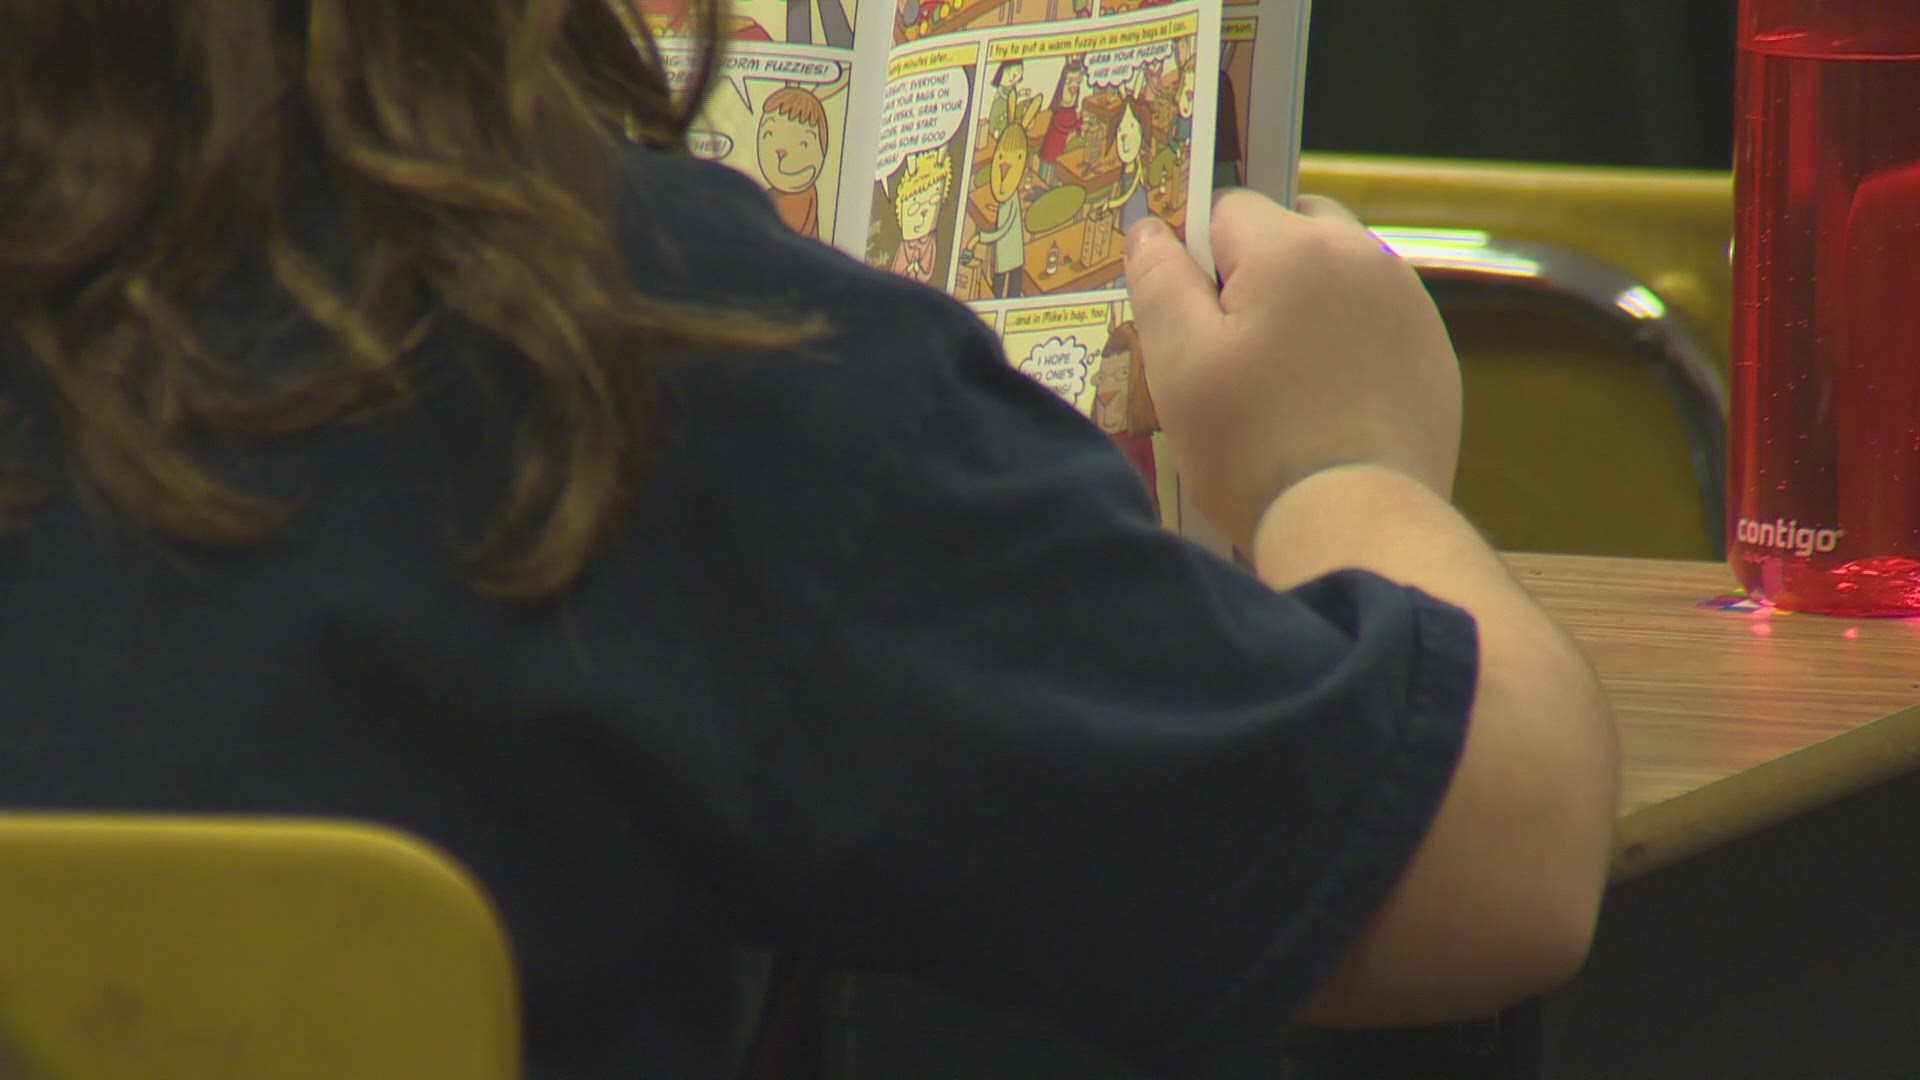 The holiday week is getting longer for a lot of kids in the Portland metro area. Many school districts have given kids the entire week off. In the past, they went to school Monday, Tuesday and Wednesday before Thanksgiving.